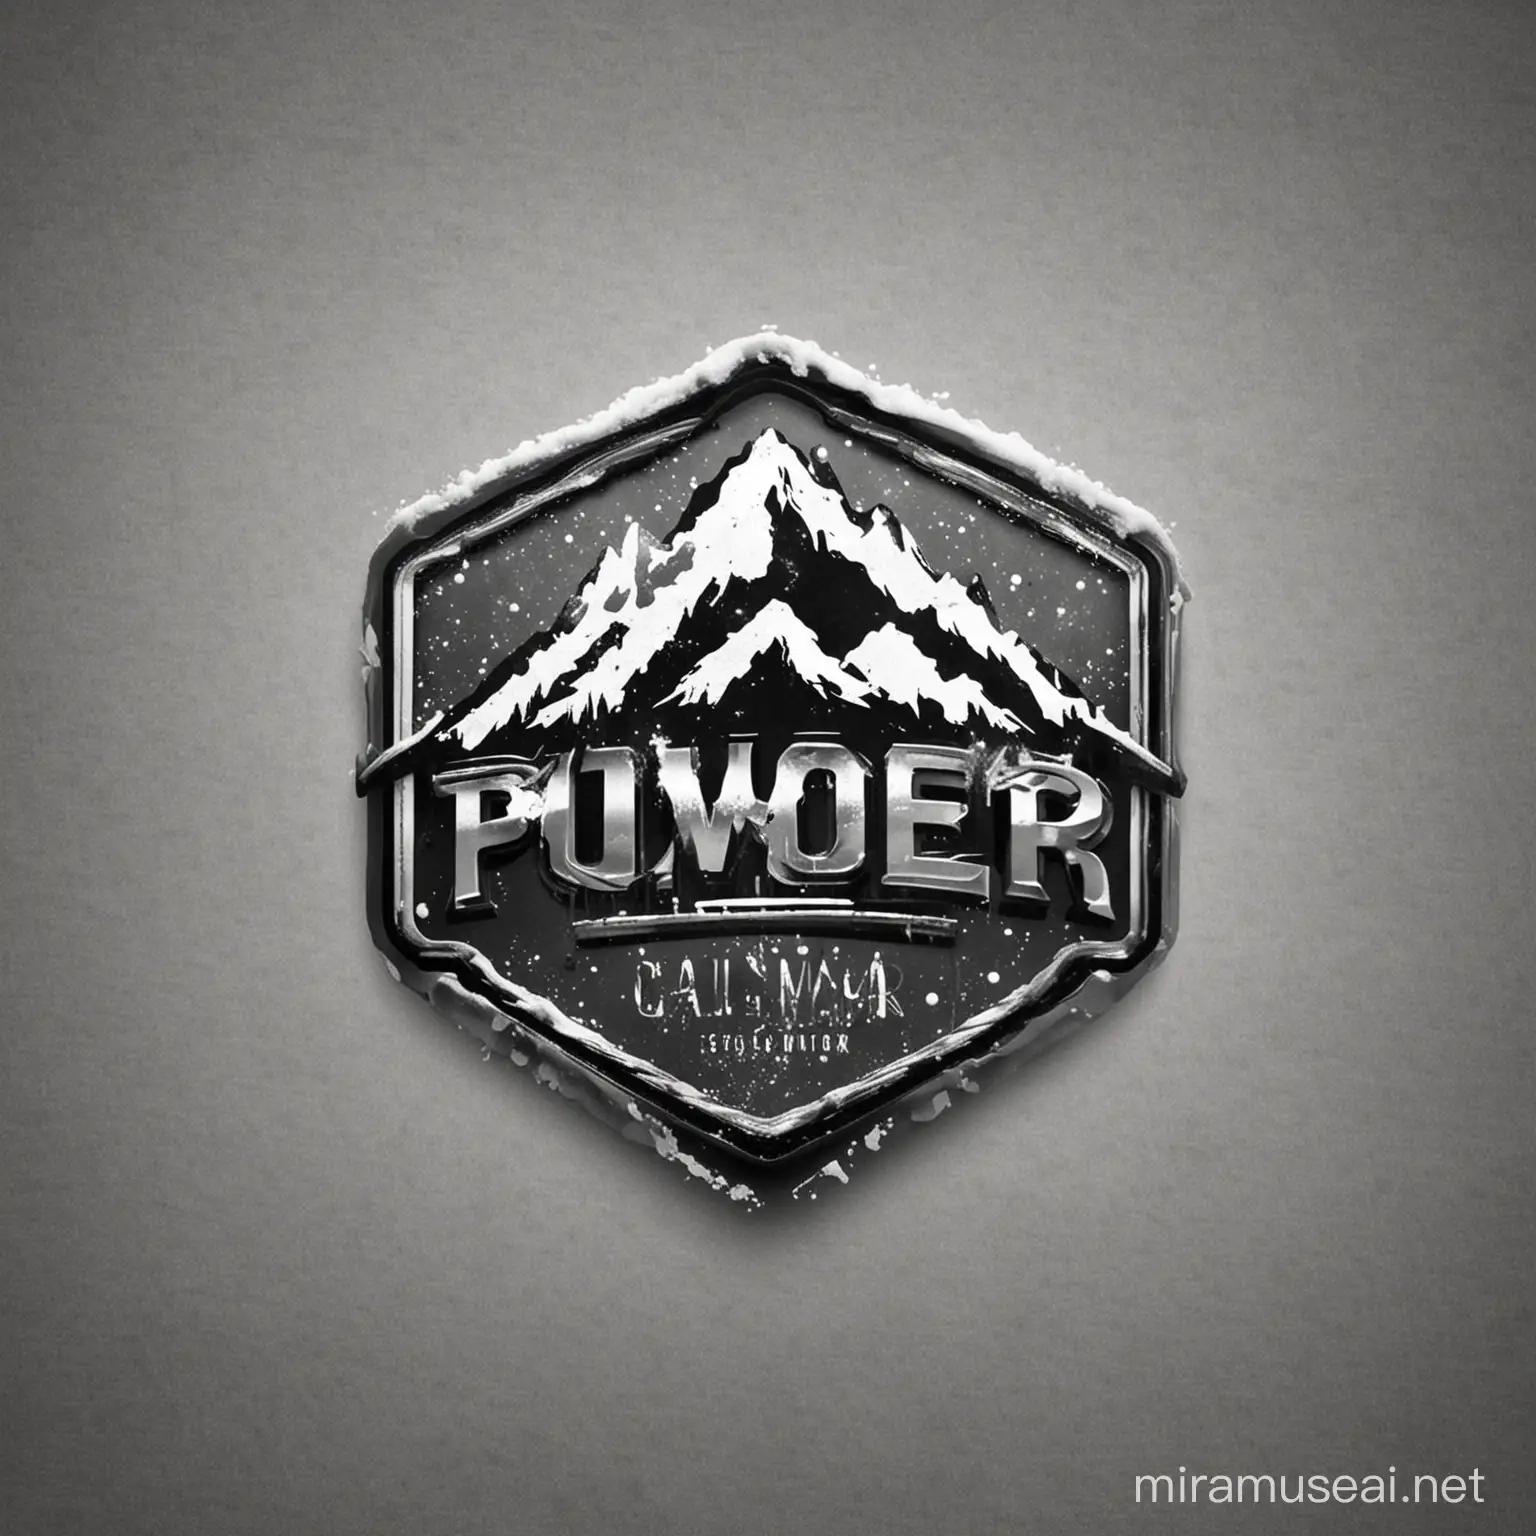 i want a logo for a new ski brand. "Powder, not Problems". It should be high resolution and cool